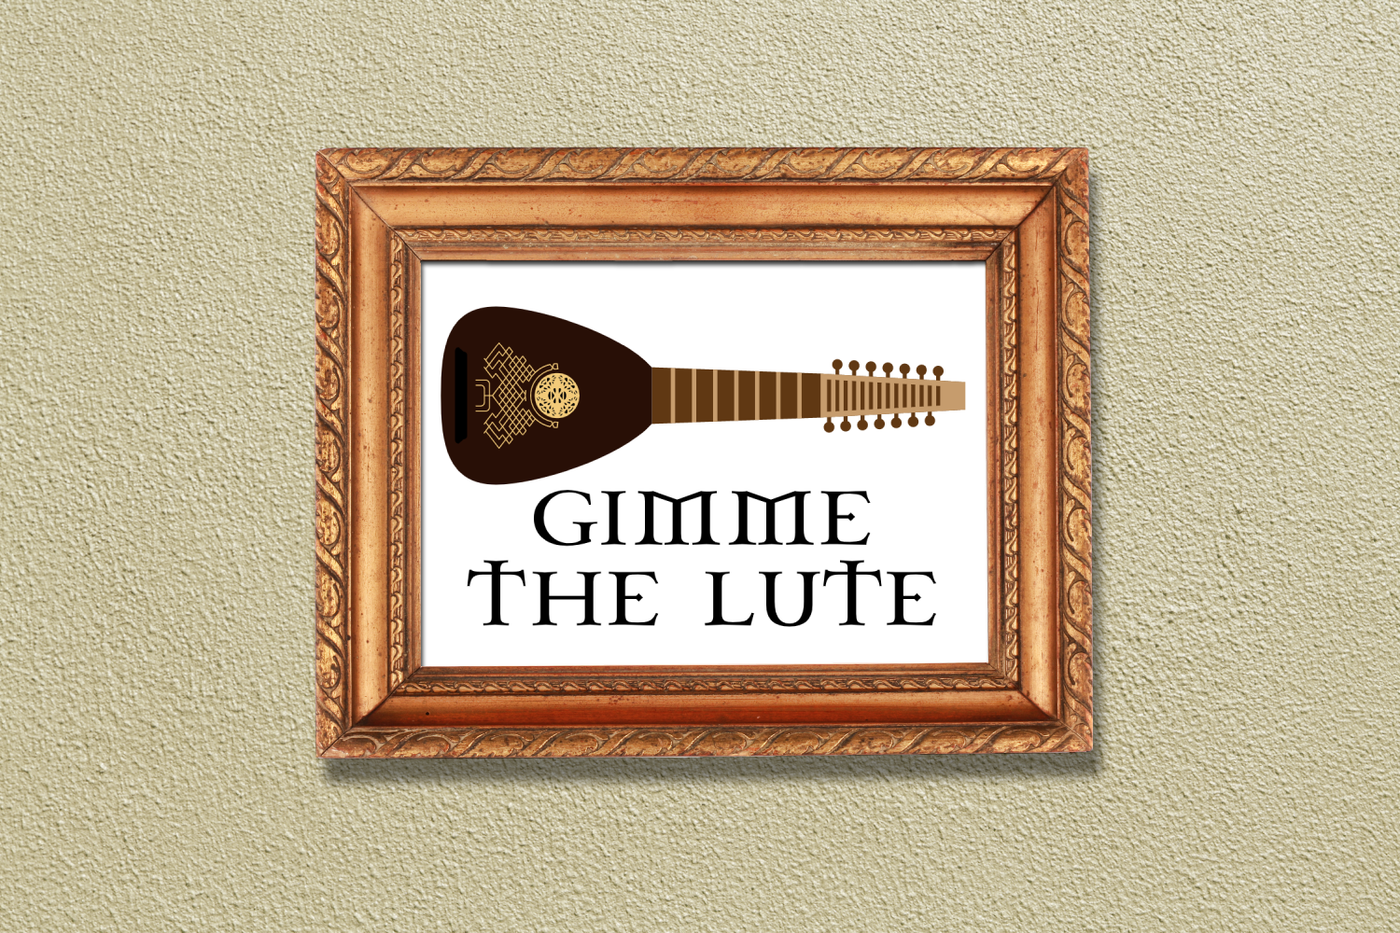 A fancy framed design sits on a beige wall. It has the image of a lute with ornate gold details and the words "gimme the lute" below.